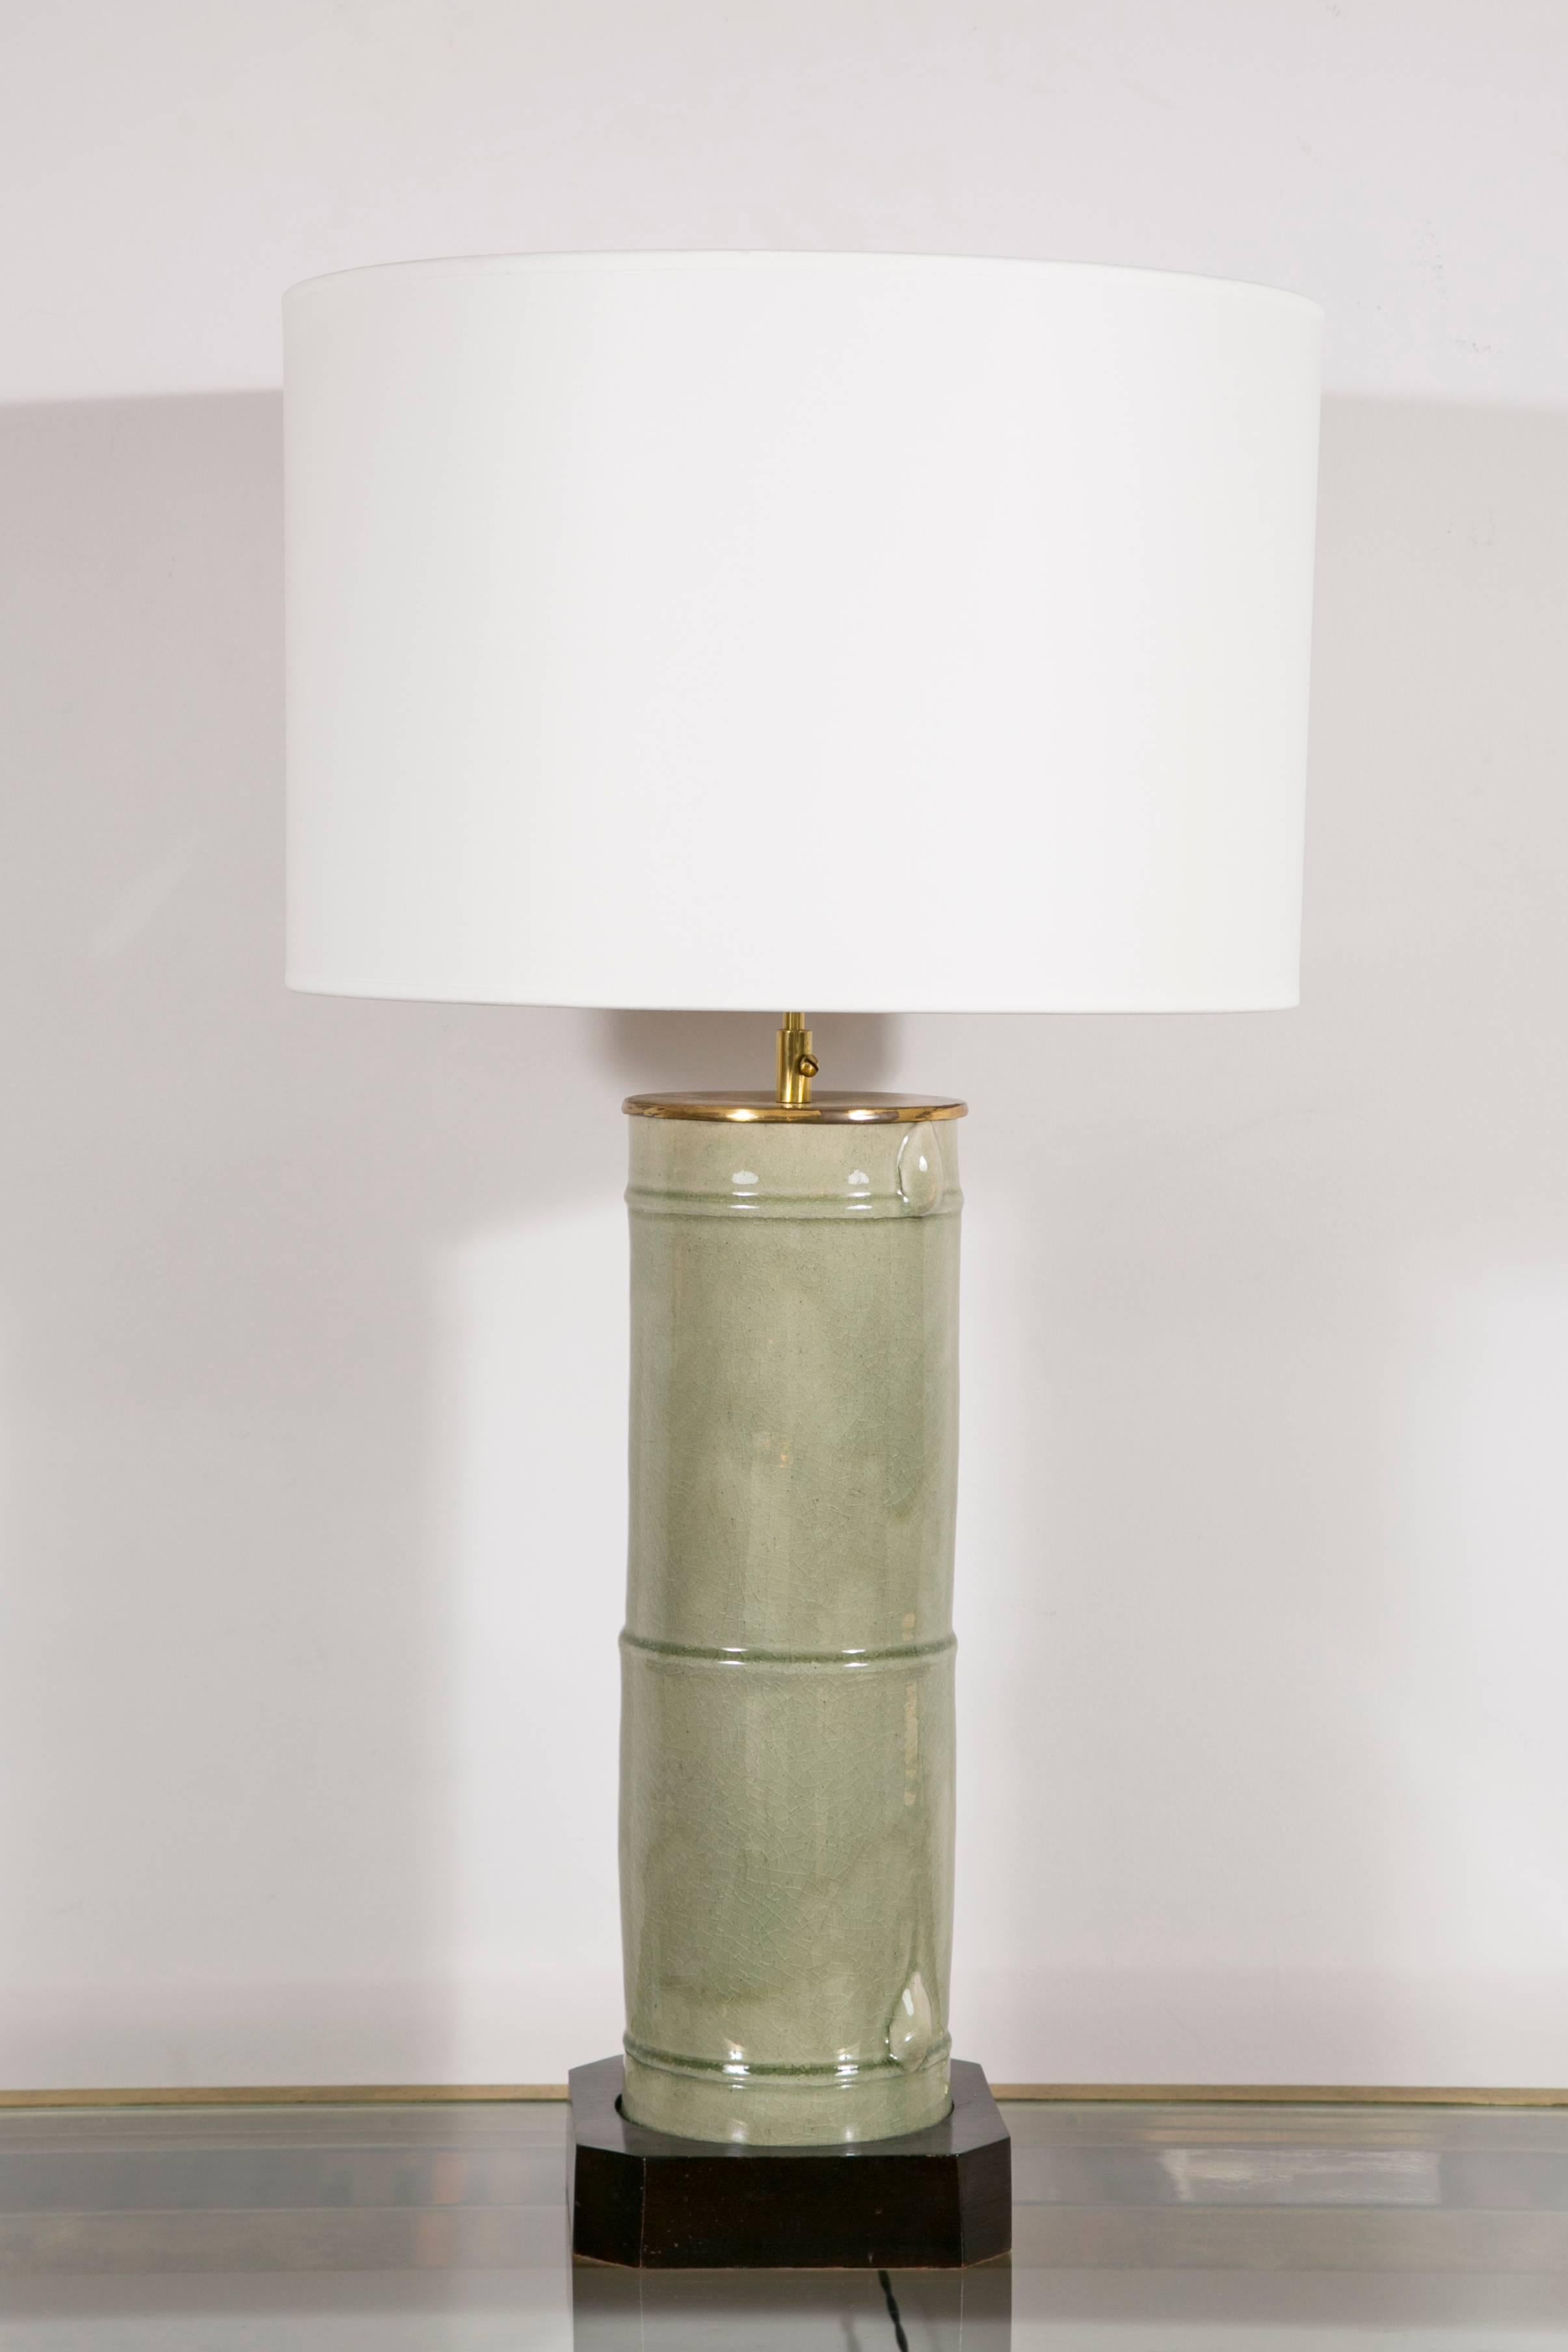 A pair of celadon lamps, figuring a bamboo stem.
Mounted on a black lacquered wood base.
Adjustable height.
New shades.
France, 1940s

The celadon may be older. 

Dimensions : 
Height (total) between 81 cm and 88 cm / 31.88 in. and 34.64